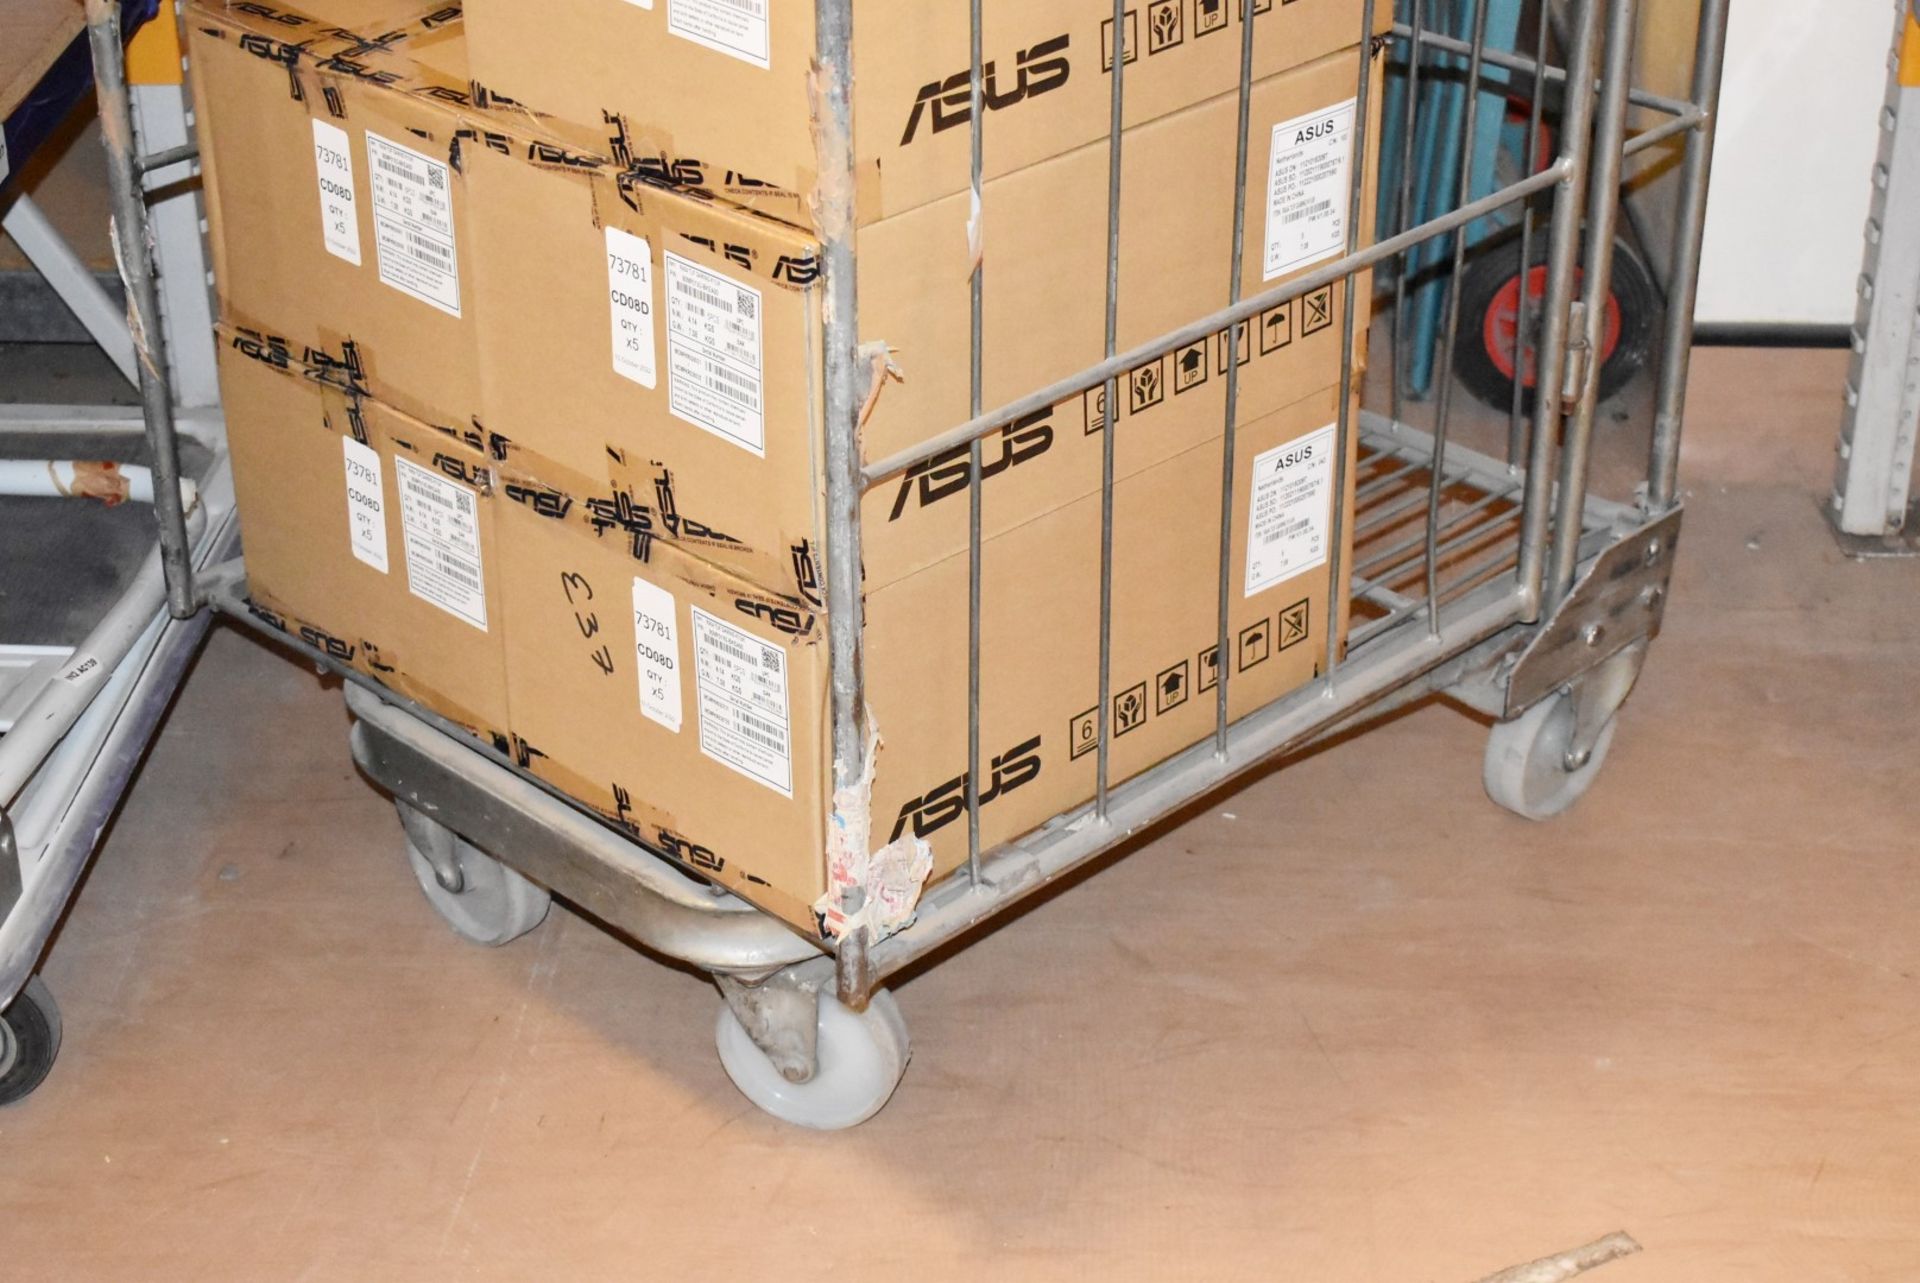 1 x Transport Cage on Heavy Duty Castors - Contents Not Included - Size: H170 x W71 x D82 cms - Ref: - Image 2 of 2